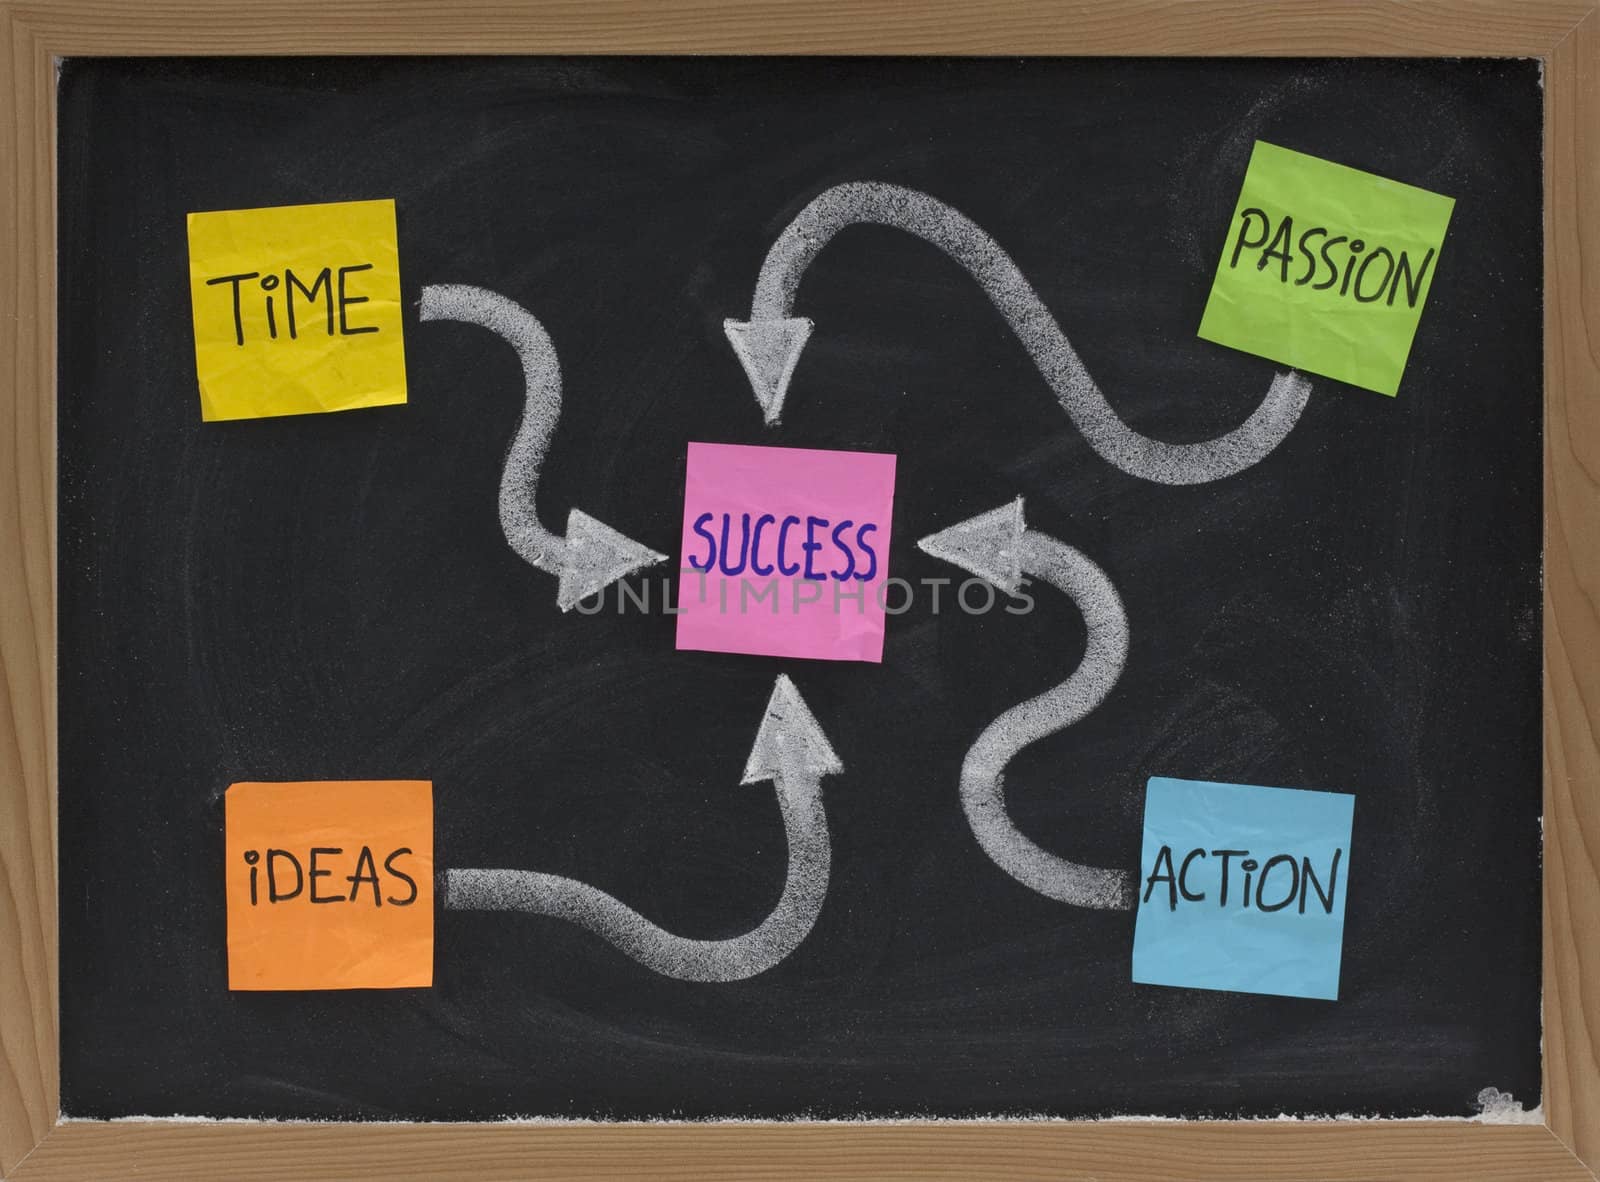 time, ideas, action, passion - success ingredients by PixelsAway